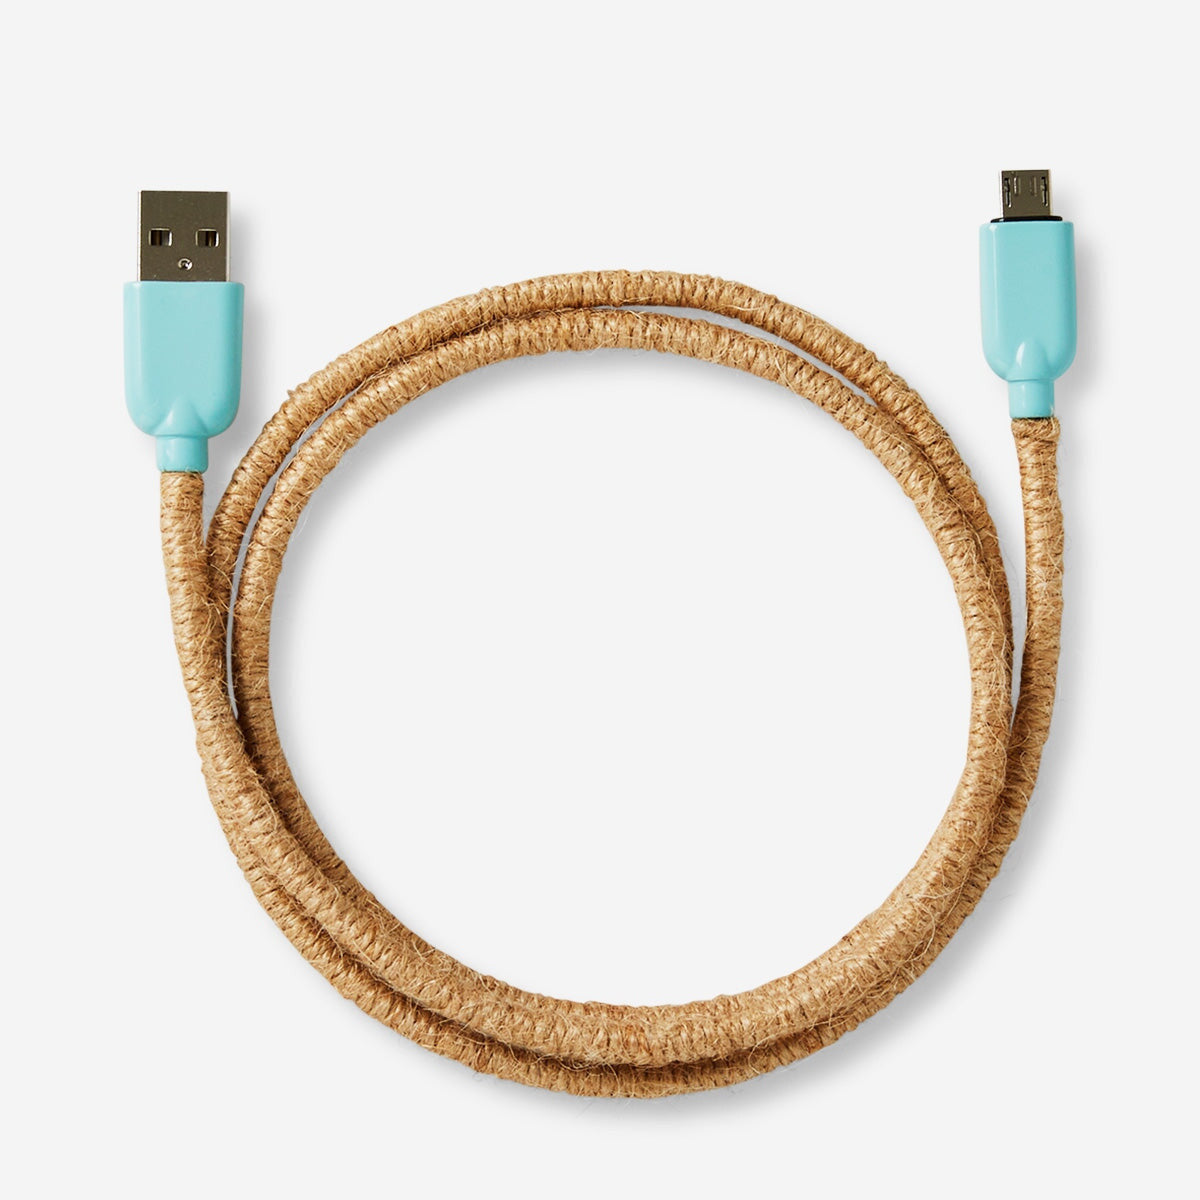 Charging cable. With micro USB Media Flying Tiger Copenhagen 